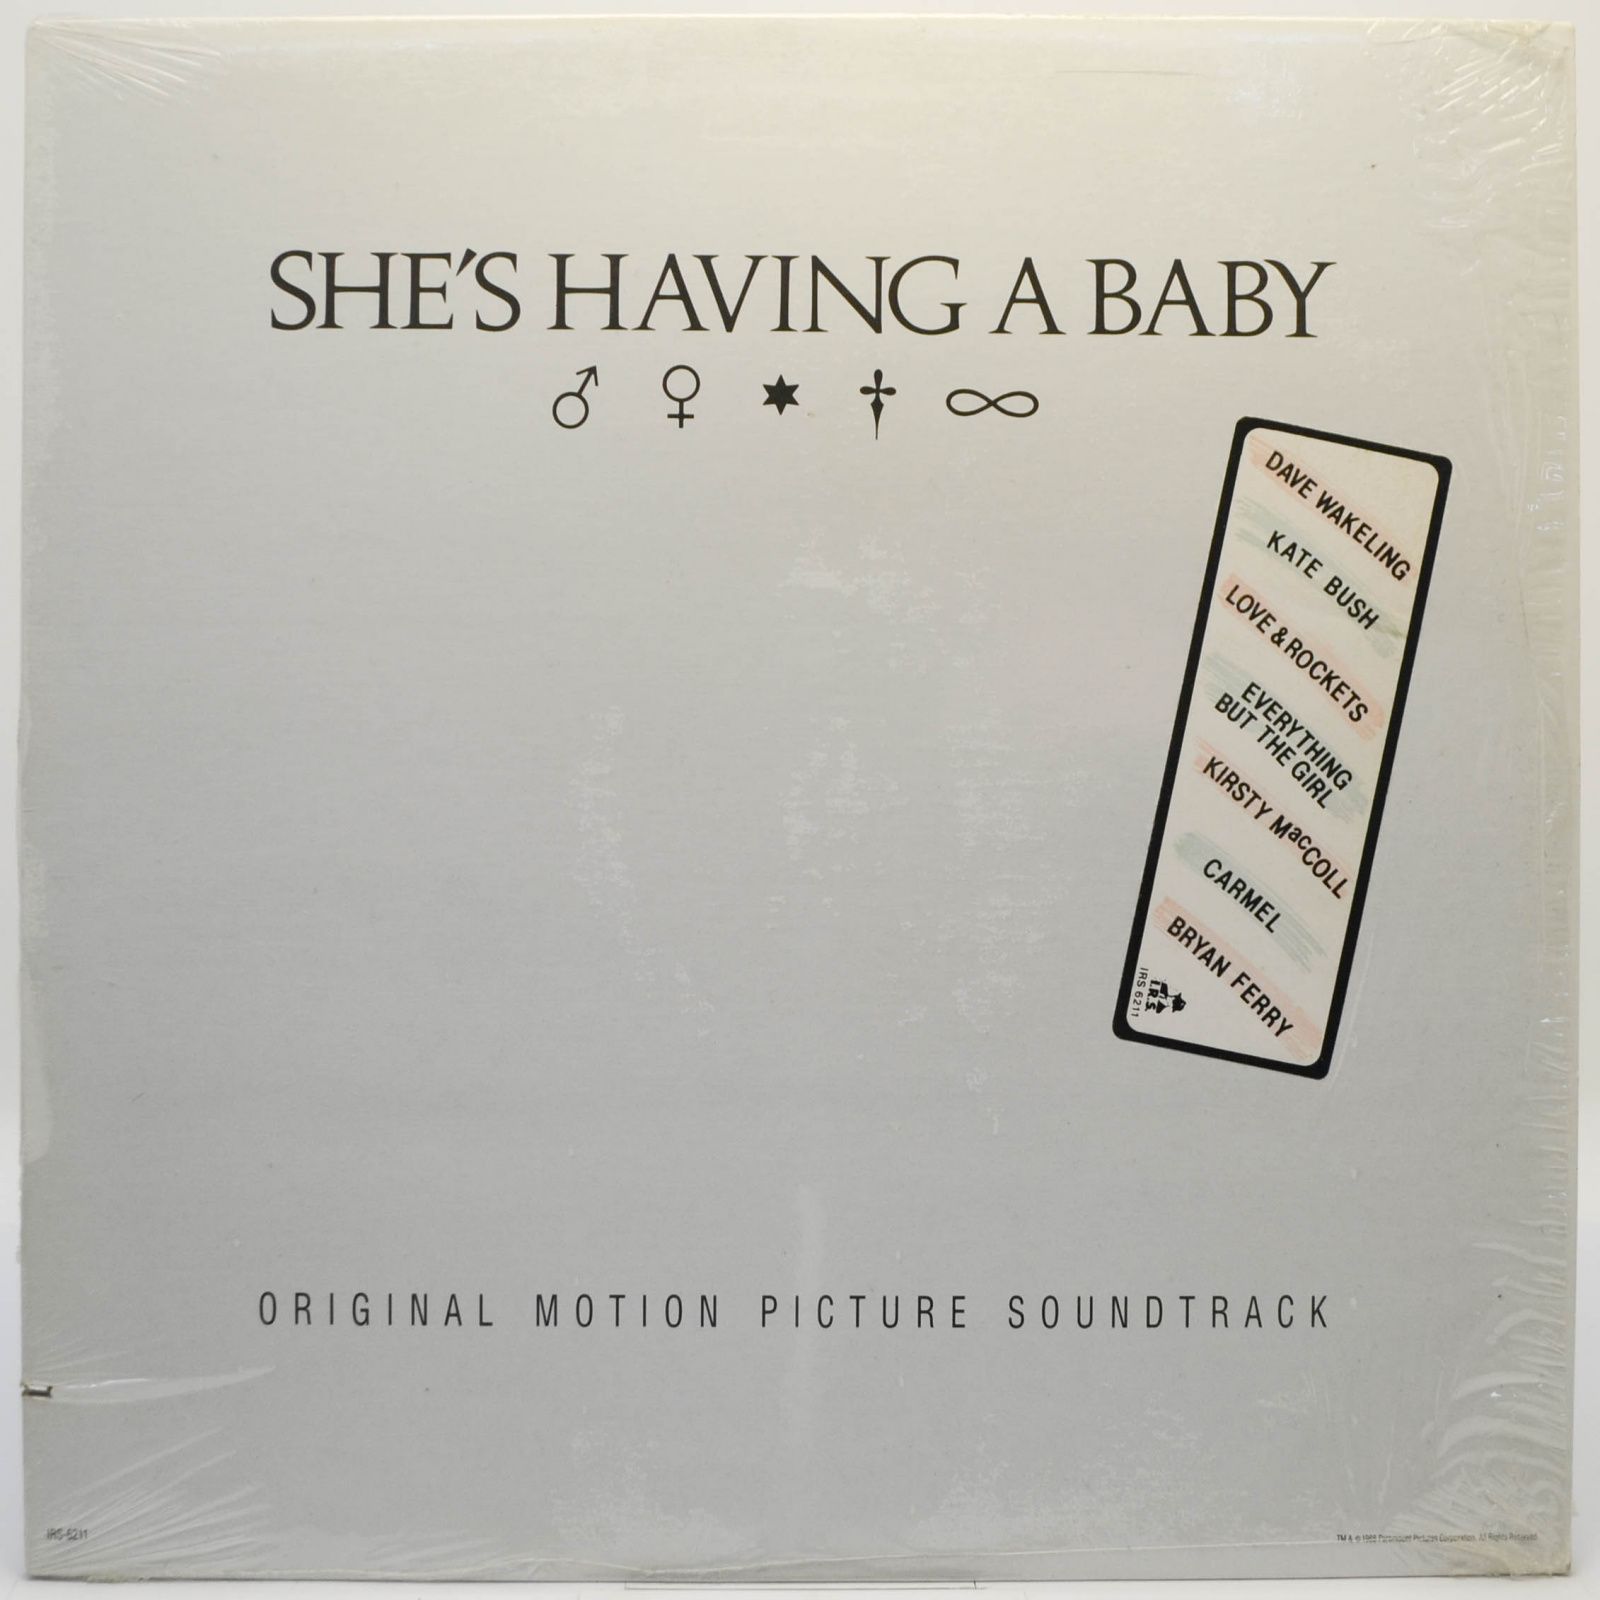 Various — She's Having A Baby (Original Motion Picture Soundtrack), 1988